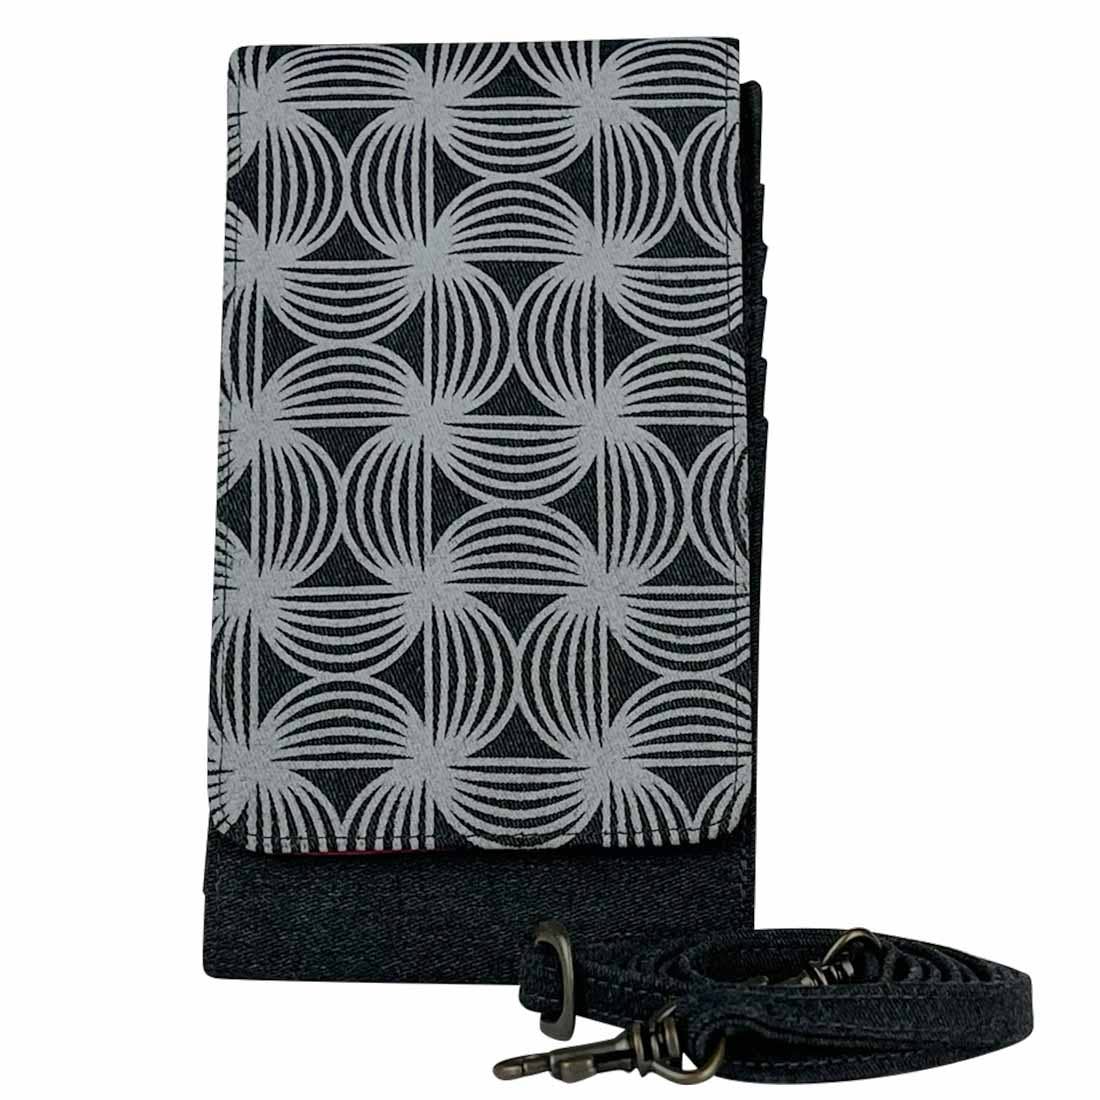 Malia Designs - Sustainable Phone Case Wallet - Peachy